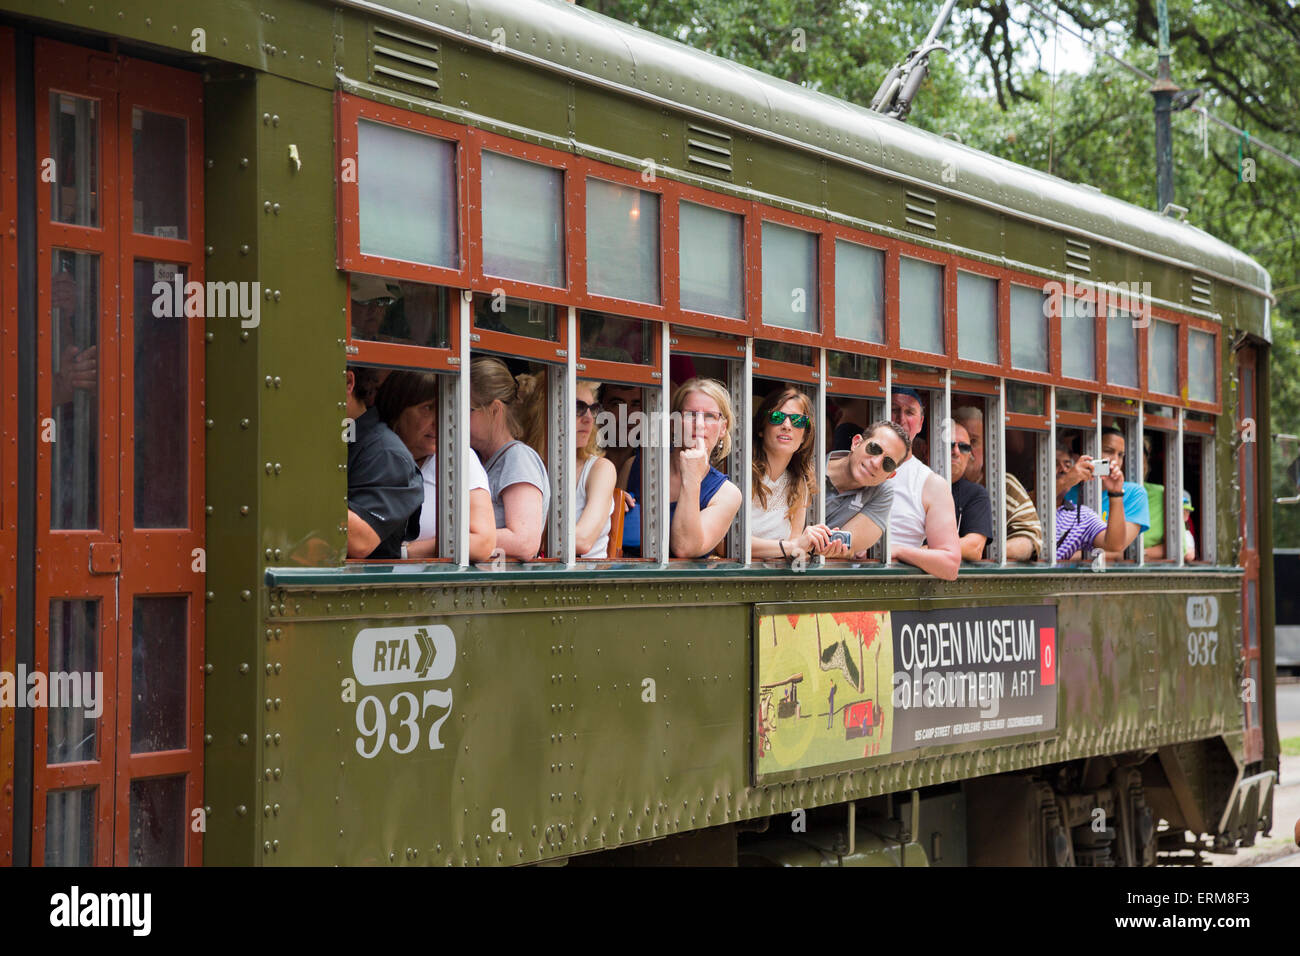 New Orleans, Louisiana - Passengers on the St. Charles Avenue streetcar. Stock Photo